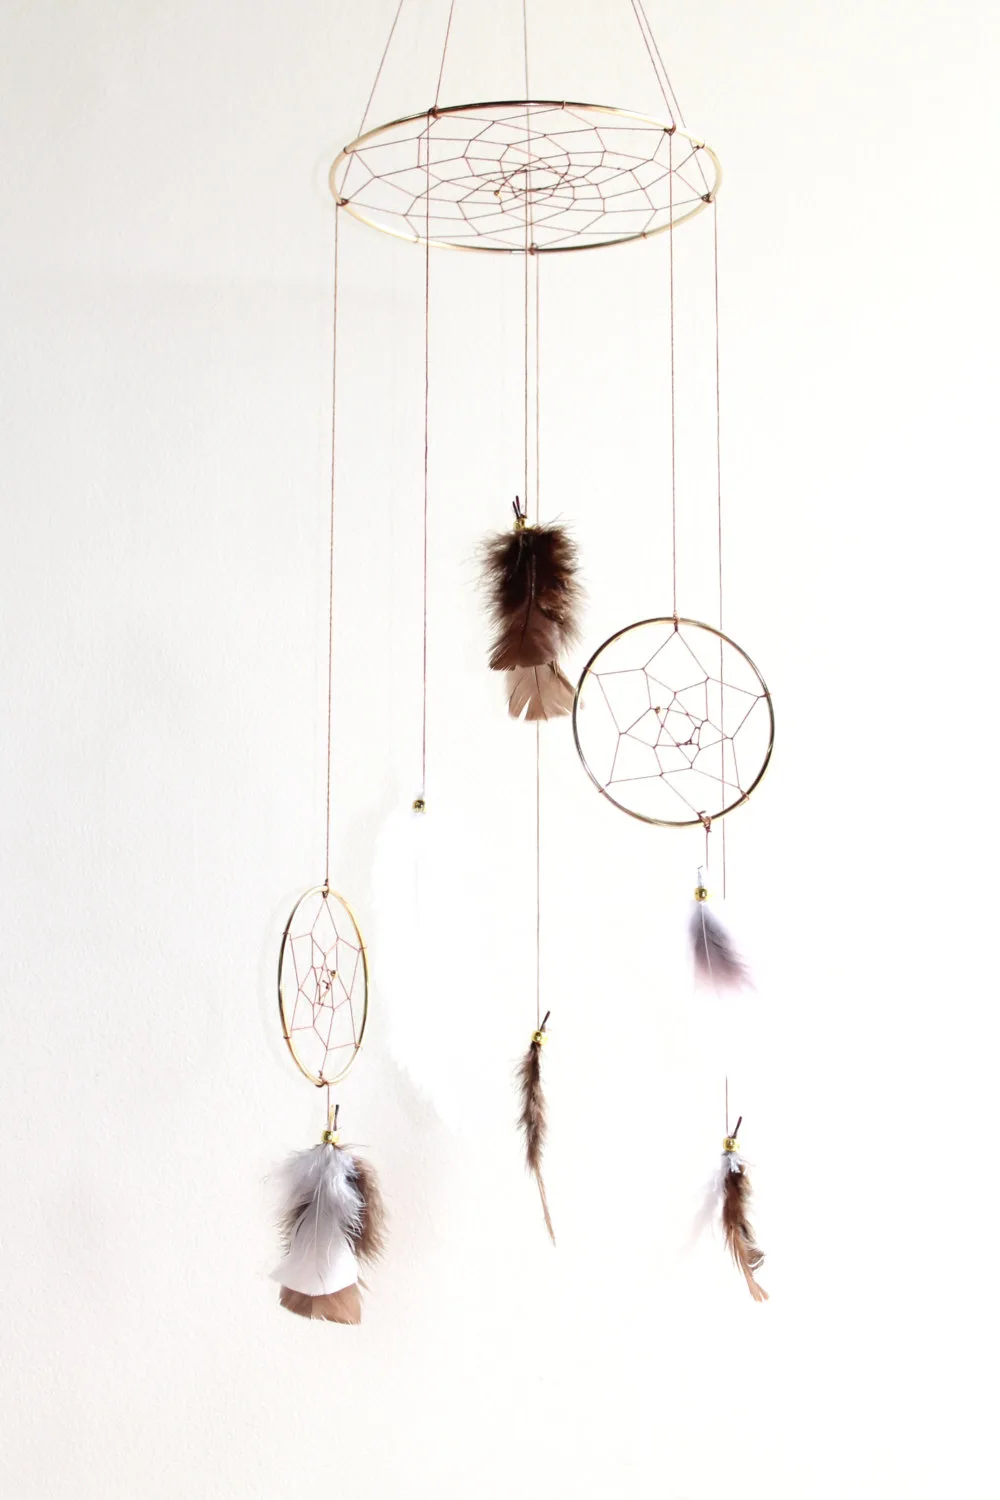 Dreamcatcher Mobile from The Dream Barn at Whitehall Farm on Etsy